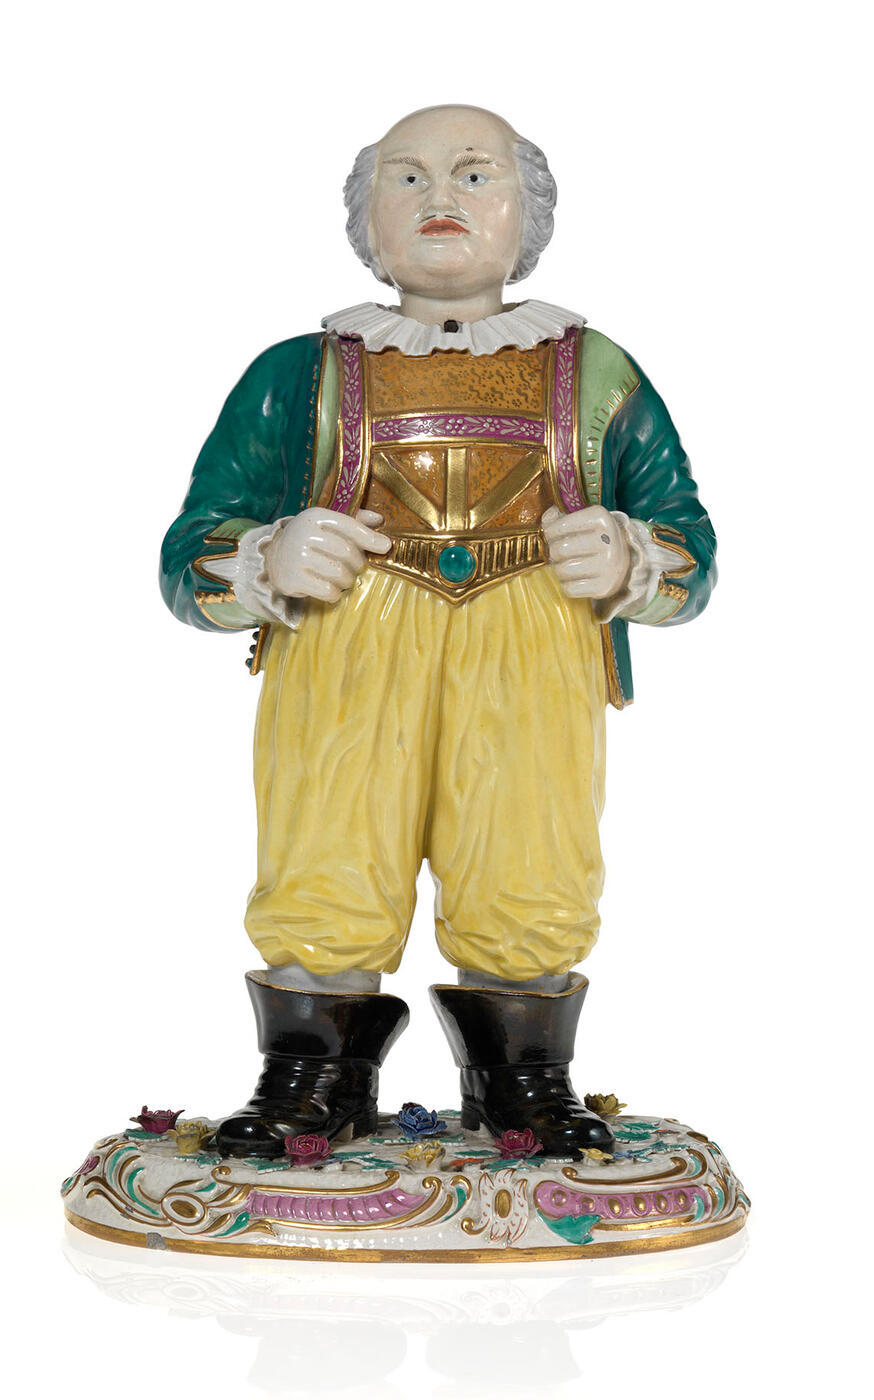 An Articulated Faience Figurine of a Jester